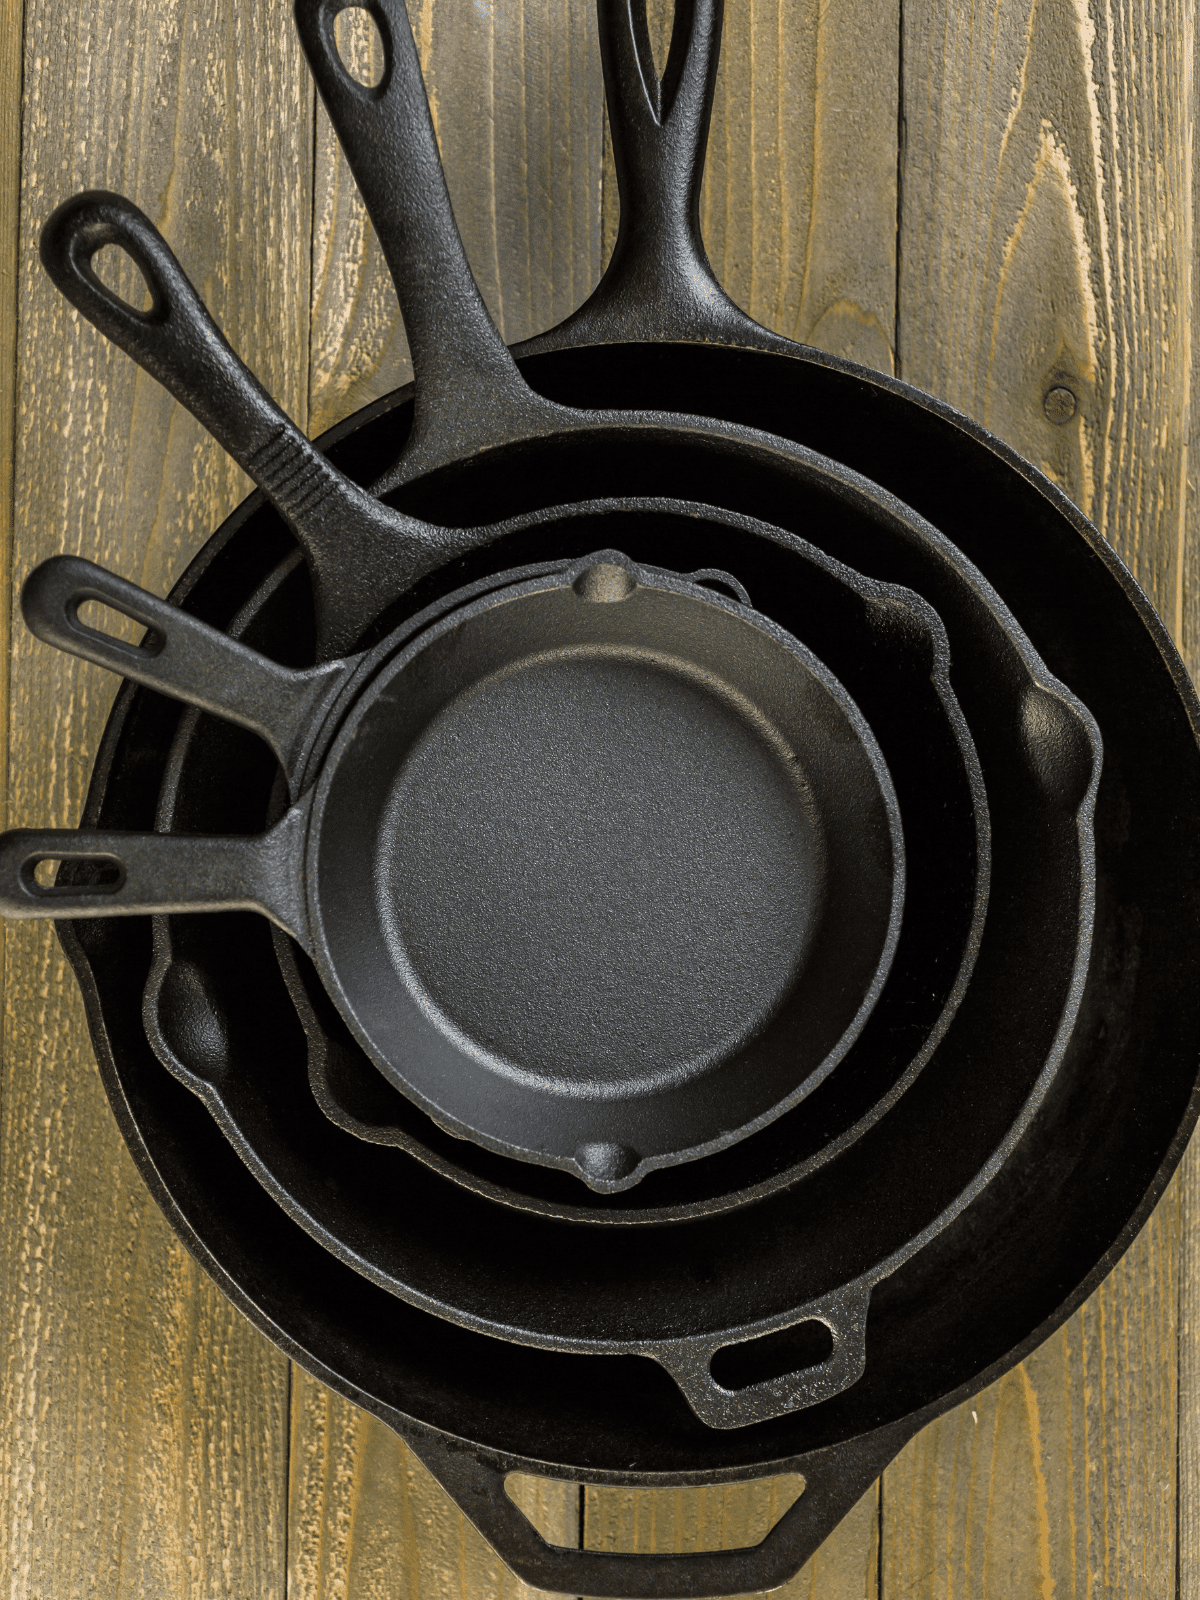 Best Pans for Searing Steaks Cast iron skillets stacked.